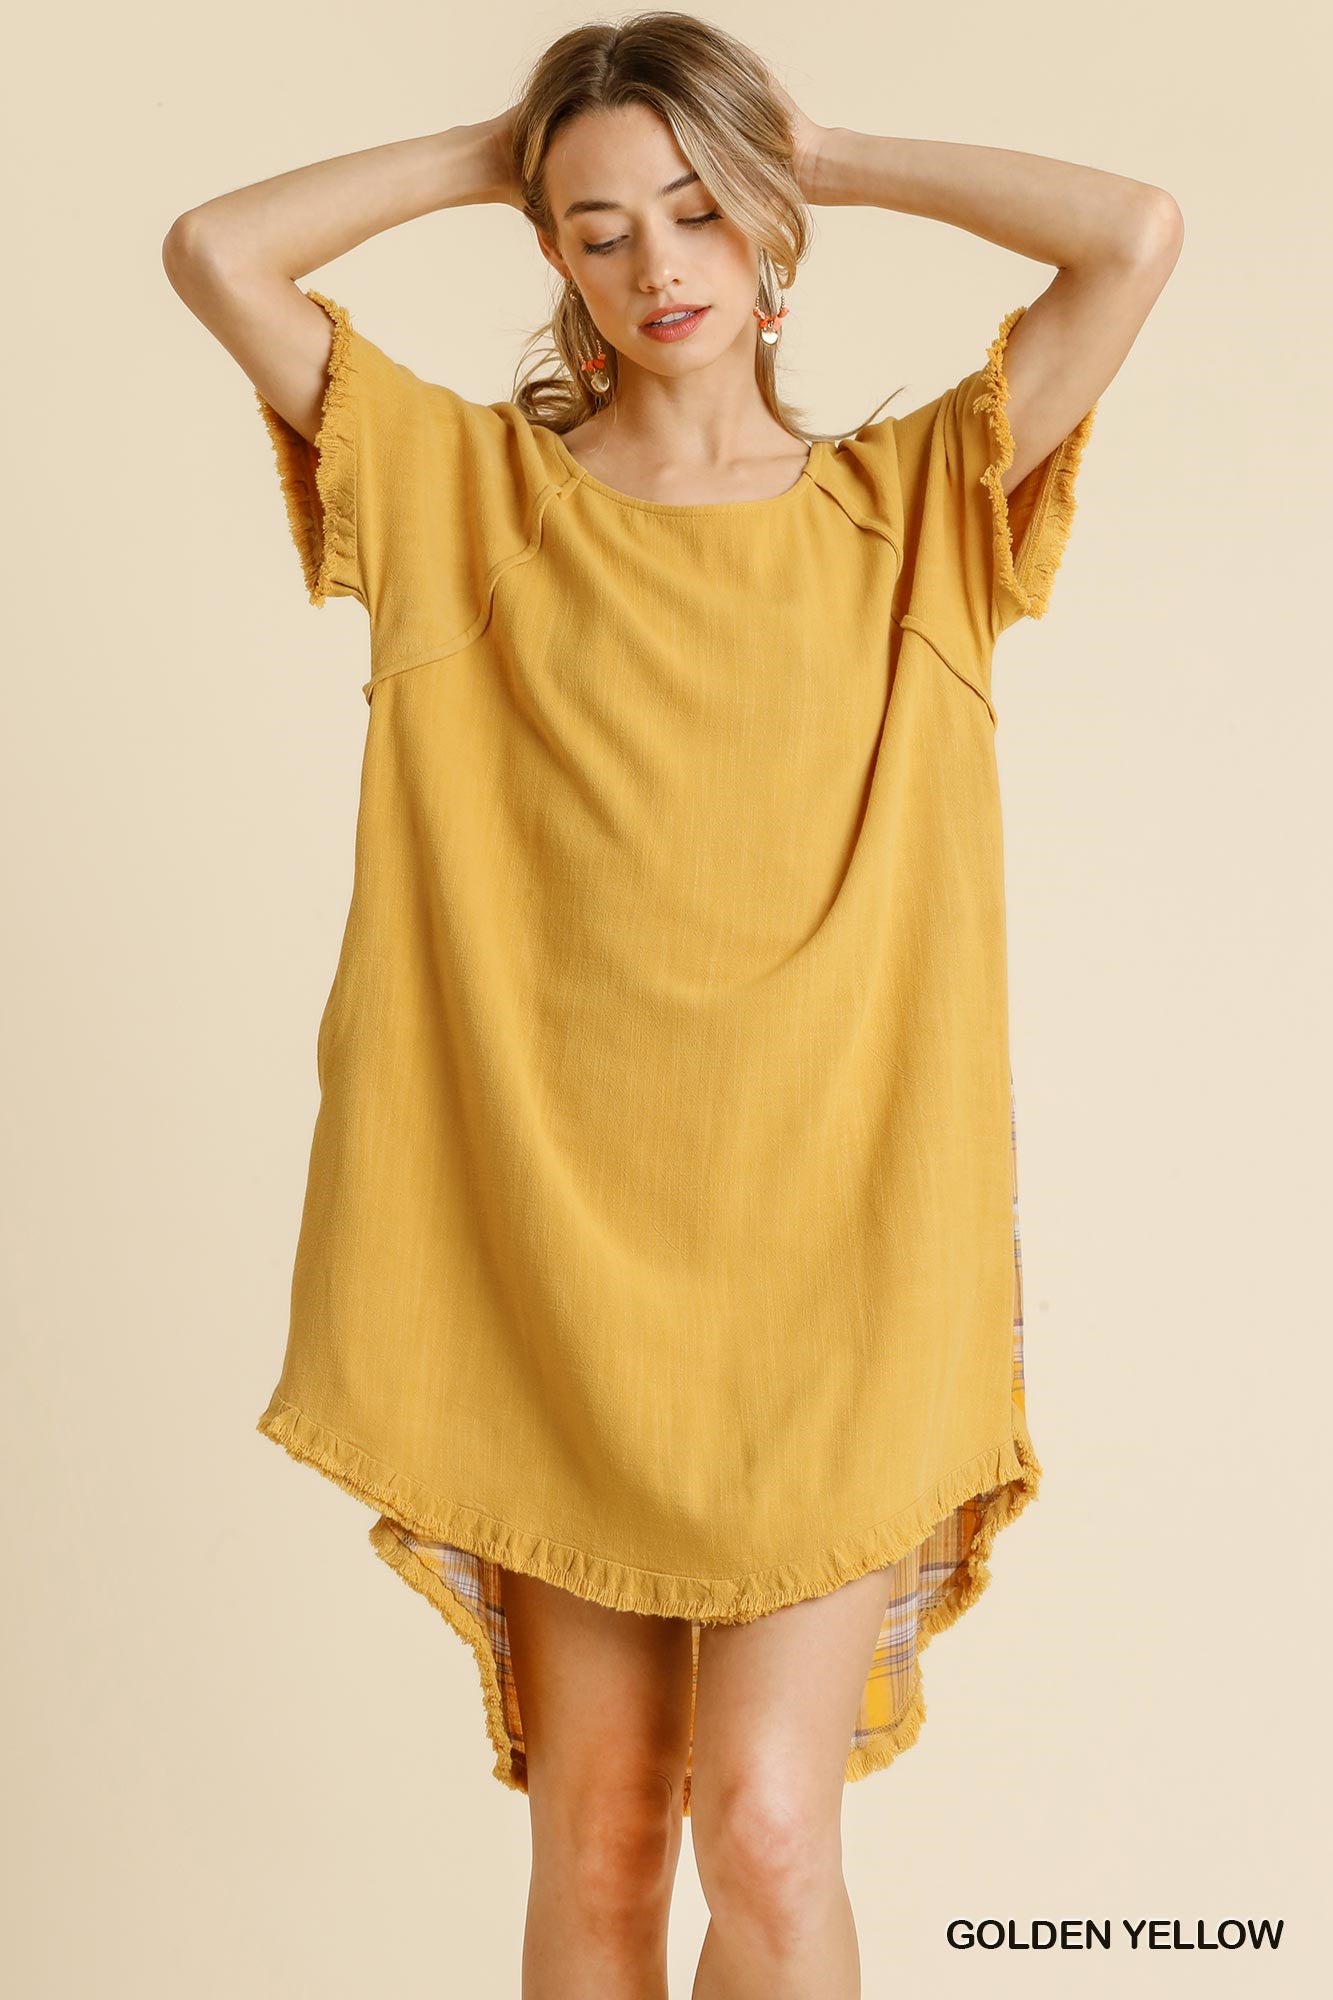 Umgee Golden Yellow Plaid Round Neck Short Sleeve Fringed Round High Low Dress - Roulhac Fashion Boutique